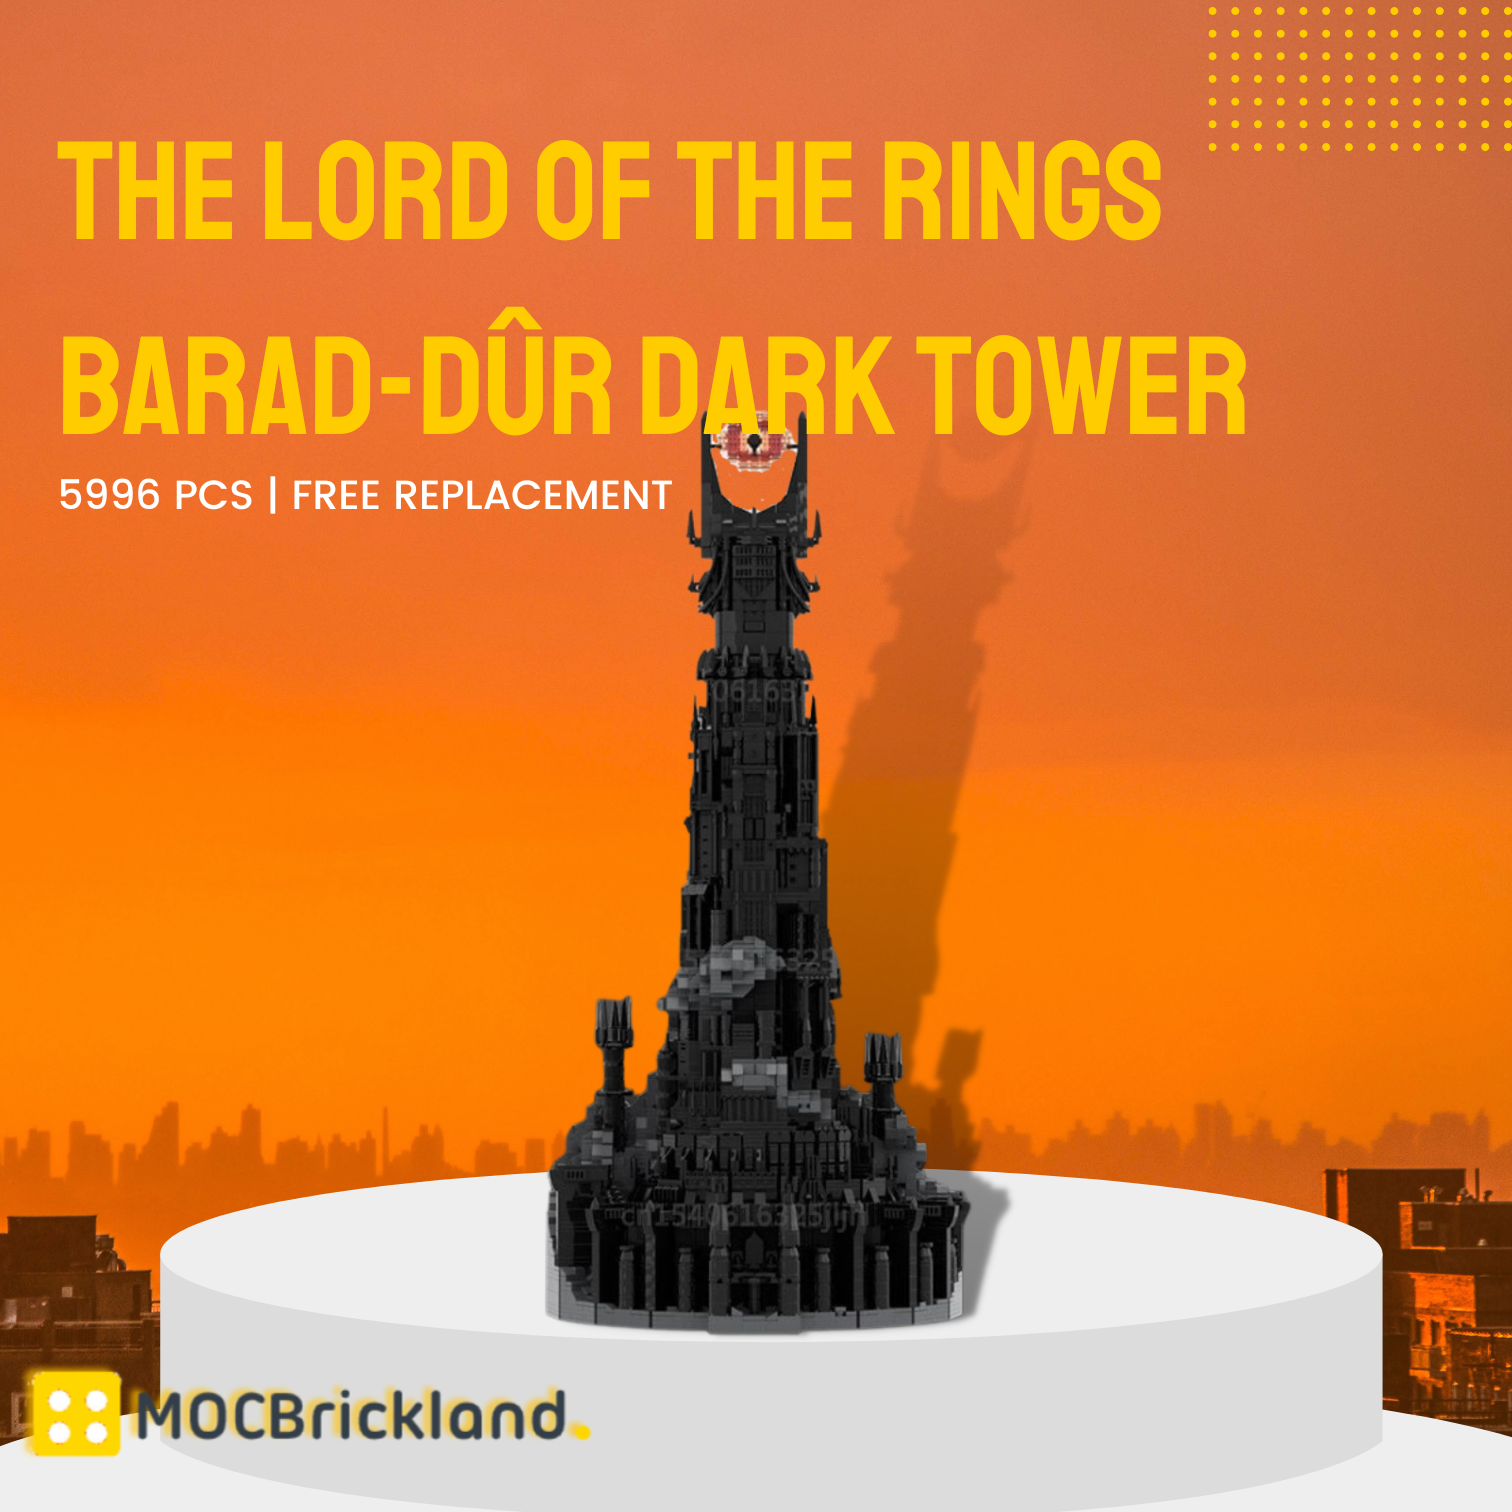 The Lord of the Rings Barad-dûr Dark Tower MOC-126262 Movie With 5996 Pieces